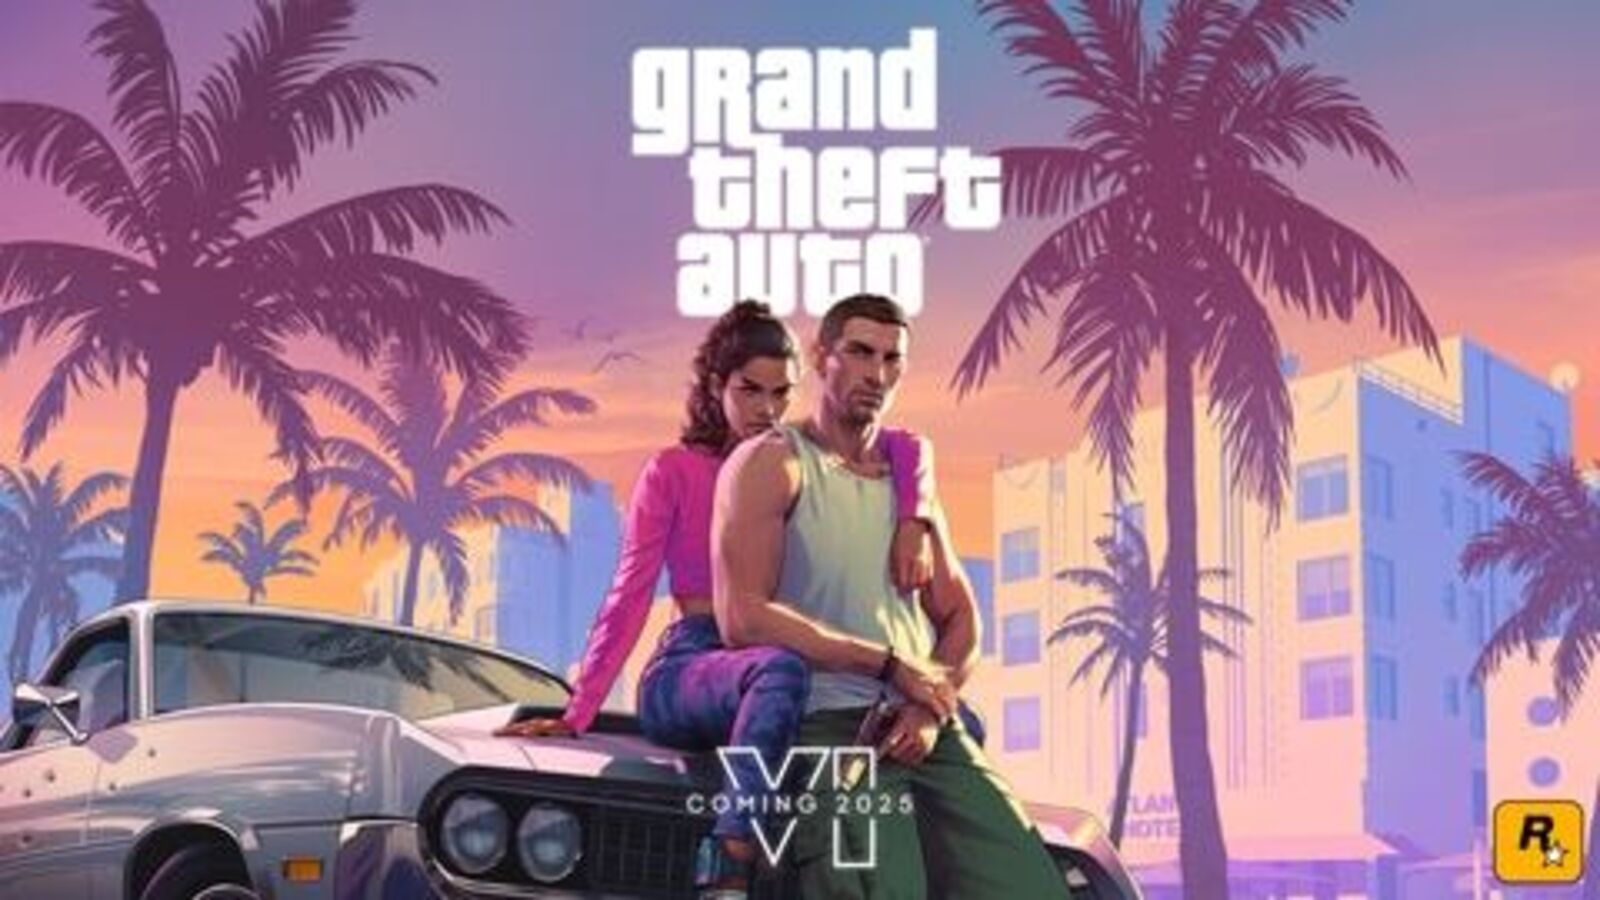 Vice City vibes: GTA 6 trailer raises hopes of a nostalgic reunion with Tommy Vercetti's waterside mansion